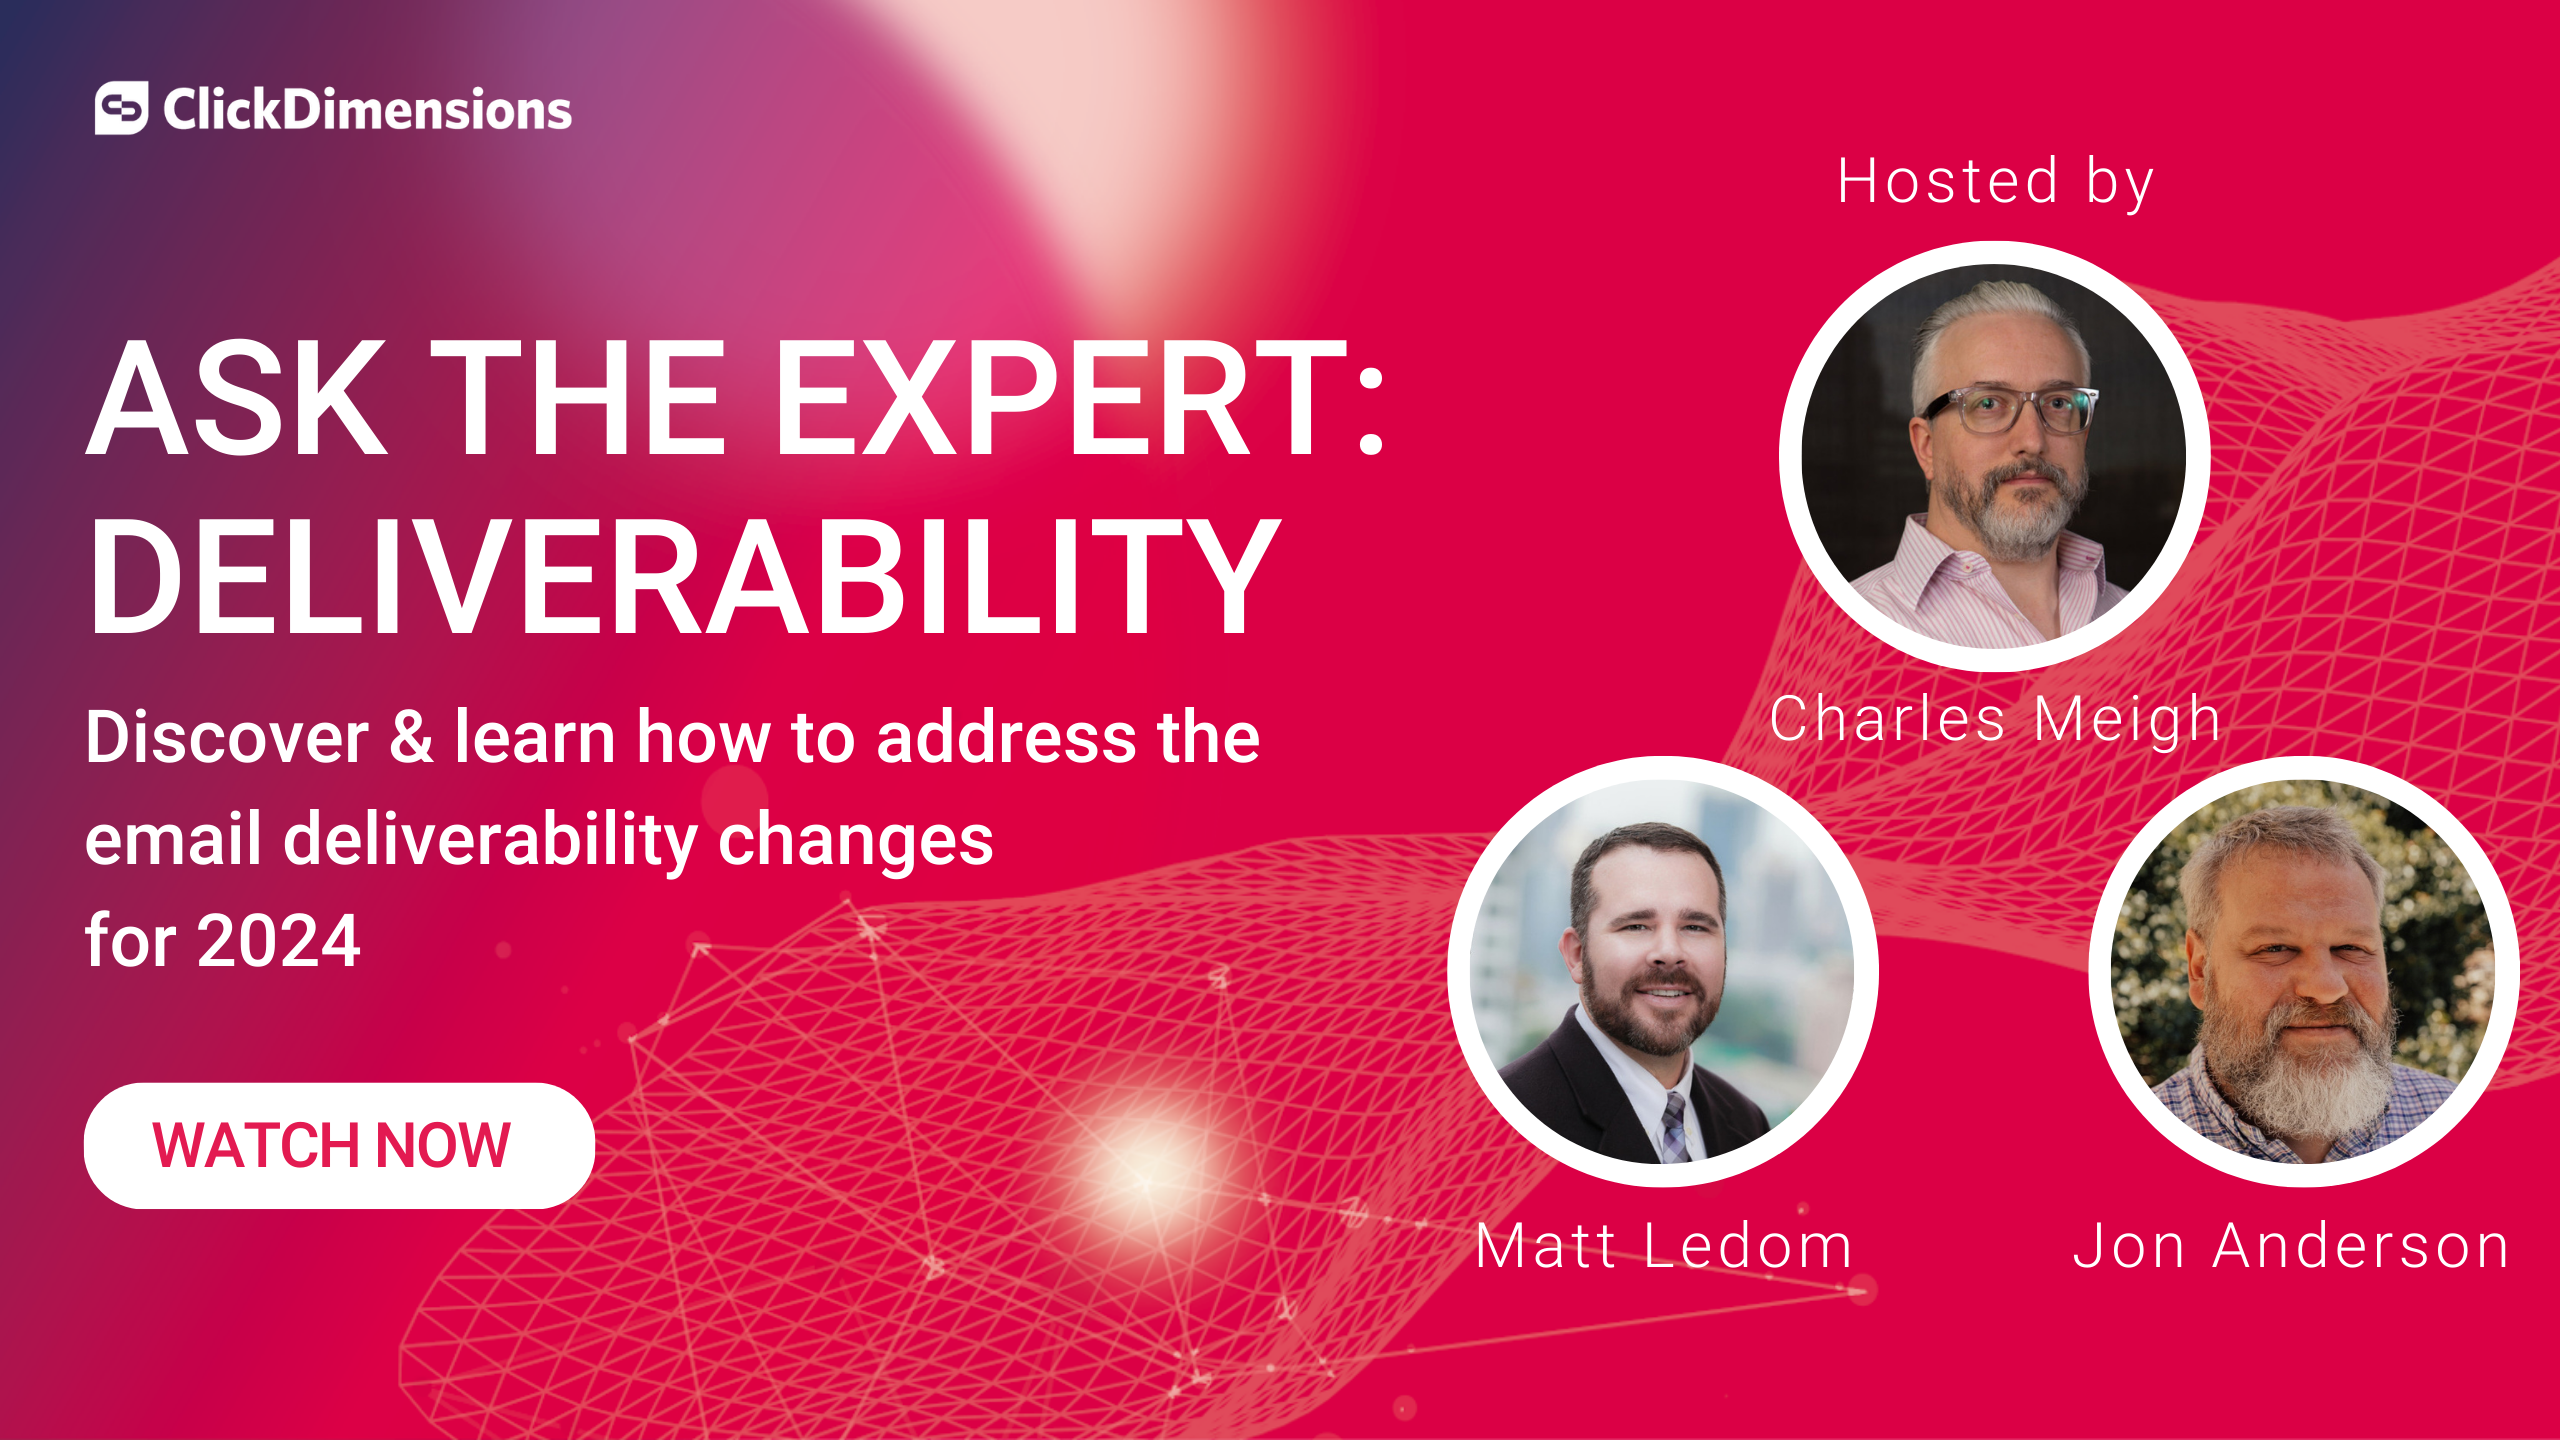 Ask the expert: Deliverability Image